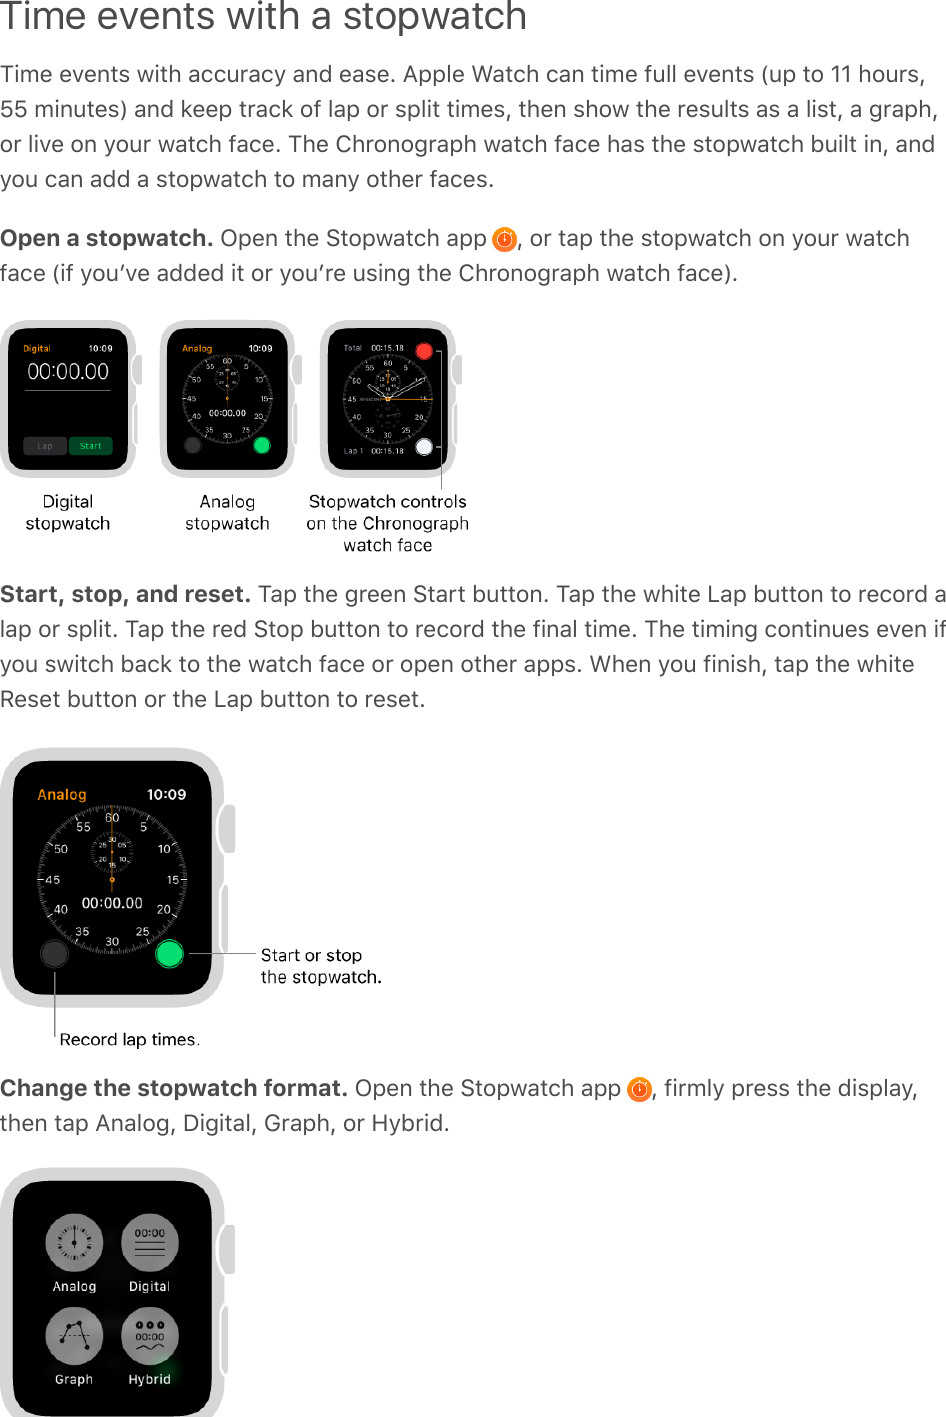 Time events with a stopwatchTime events with accuracy and ease. Apple Watch can time full events (up to 11 hours,55 minutes) and keep track of lap or split times, then show the results as a list, a graph,or live on your watch face. The Chronograph watch face has the stopwatch built in, andyou can add a stopwatch to many other faces.Open a stopwatch. Open the Stopwatch app  , or tap the stopwatch on your watchface (if youʼve added it or youʼre using the Chronograph watch face).Start, stop, and reset. Tap the green Start button. Tap the white Lap button to record alap or split. Tap the red Stop button to record the final time. The timing continues even ifyou switch back to the watch face or open other apps. When you finish, tap the whiteReset button or the Lap button to reset.Change the stopwatch format. Open the Stopwatch app  , firmly press the display,then tap Analog, Digital, Graph, or Hybrid.